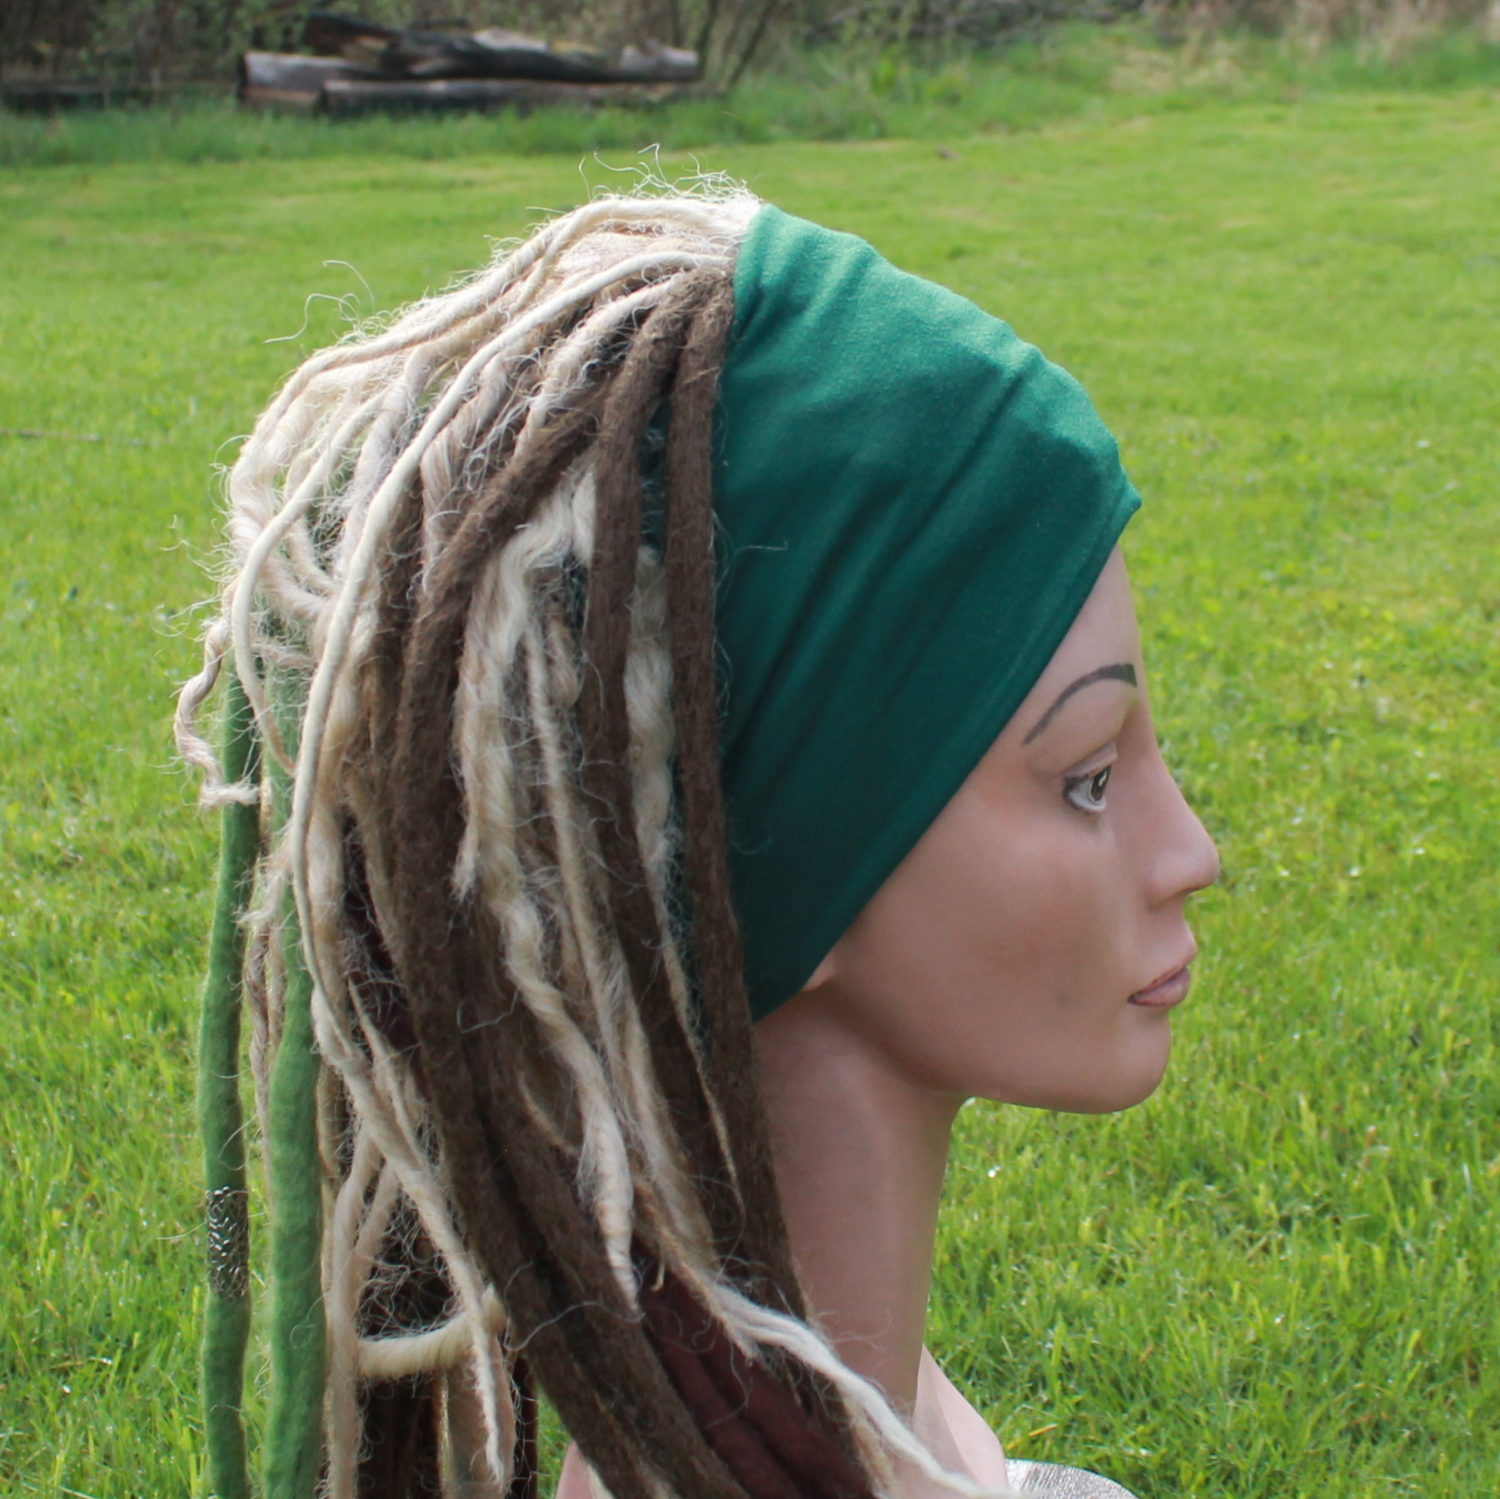 Want to buy a Headband for your Dreads? Come to Dreadshop!